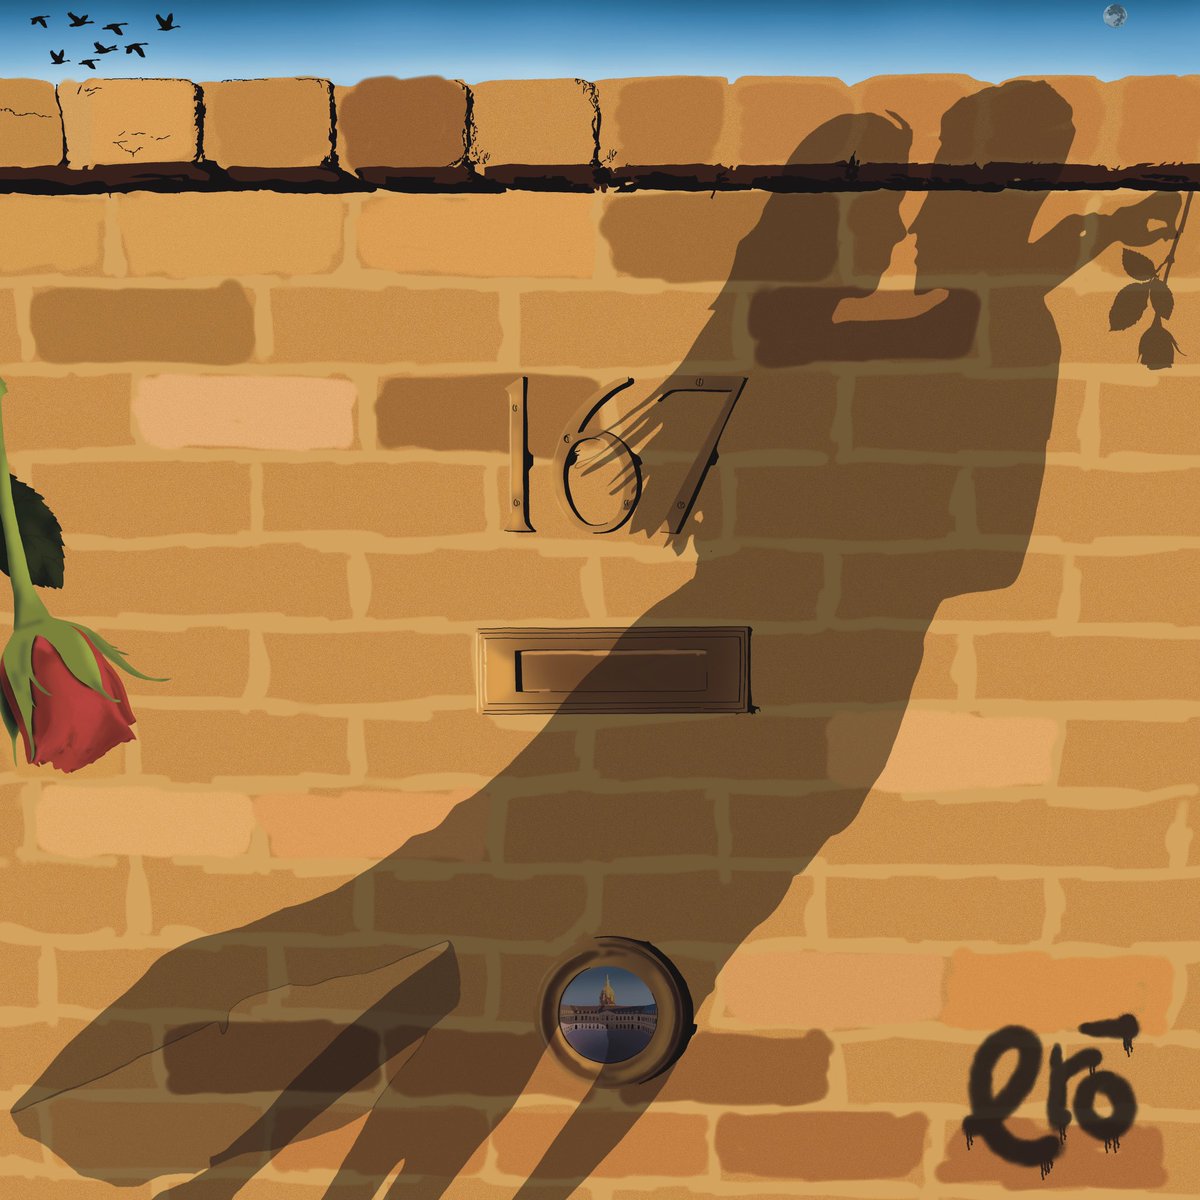 Graffiti on the wall or no graffiti on the wall? The graffiti is a reference to my old work I used to do. Still got the bricks to finish off anyway. Follow on from ‘The Date’ #wip #digitalart